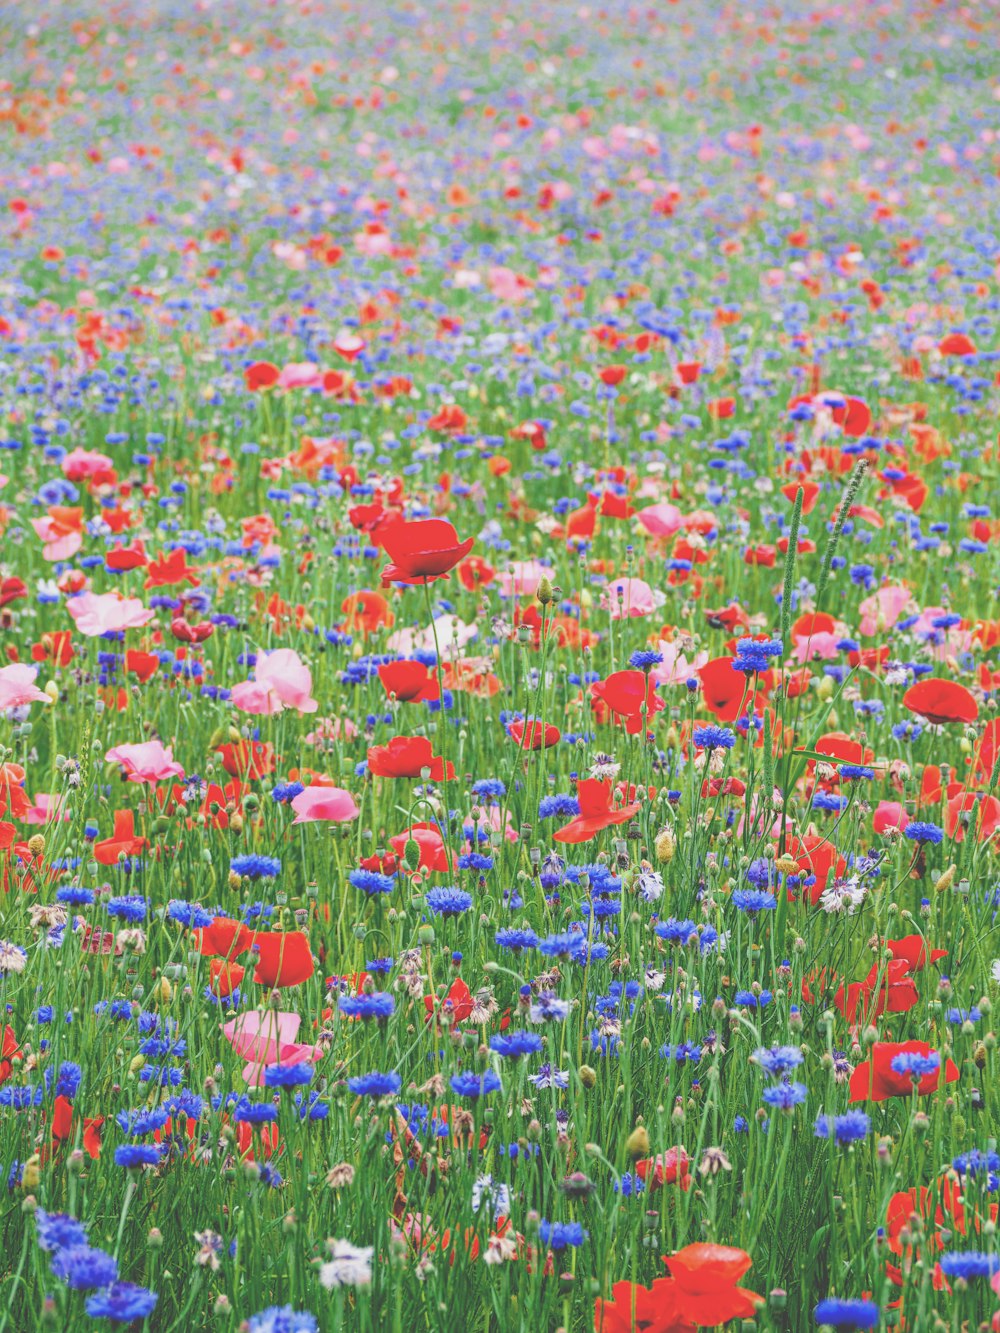 Field Of Flowers Photos, Download The BEST Free Field Of Flowers